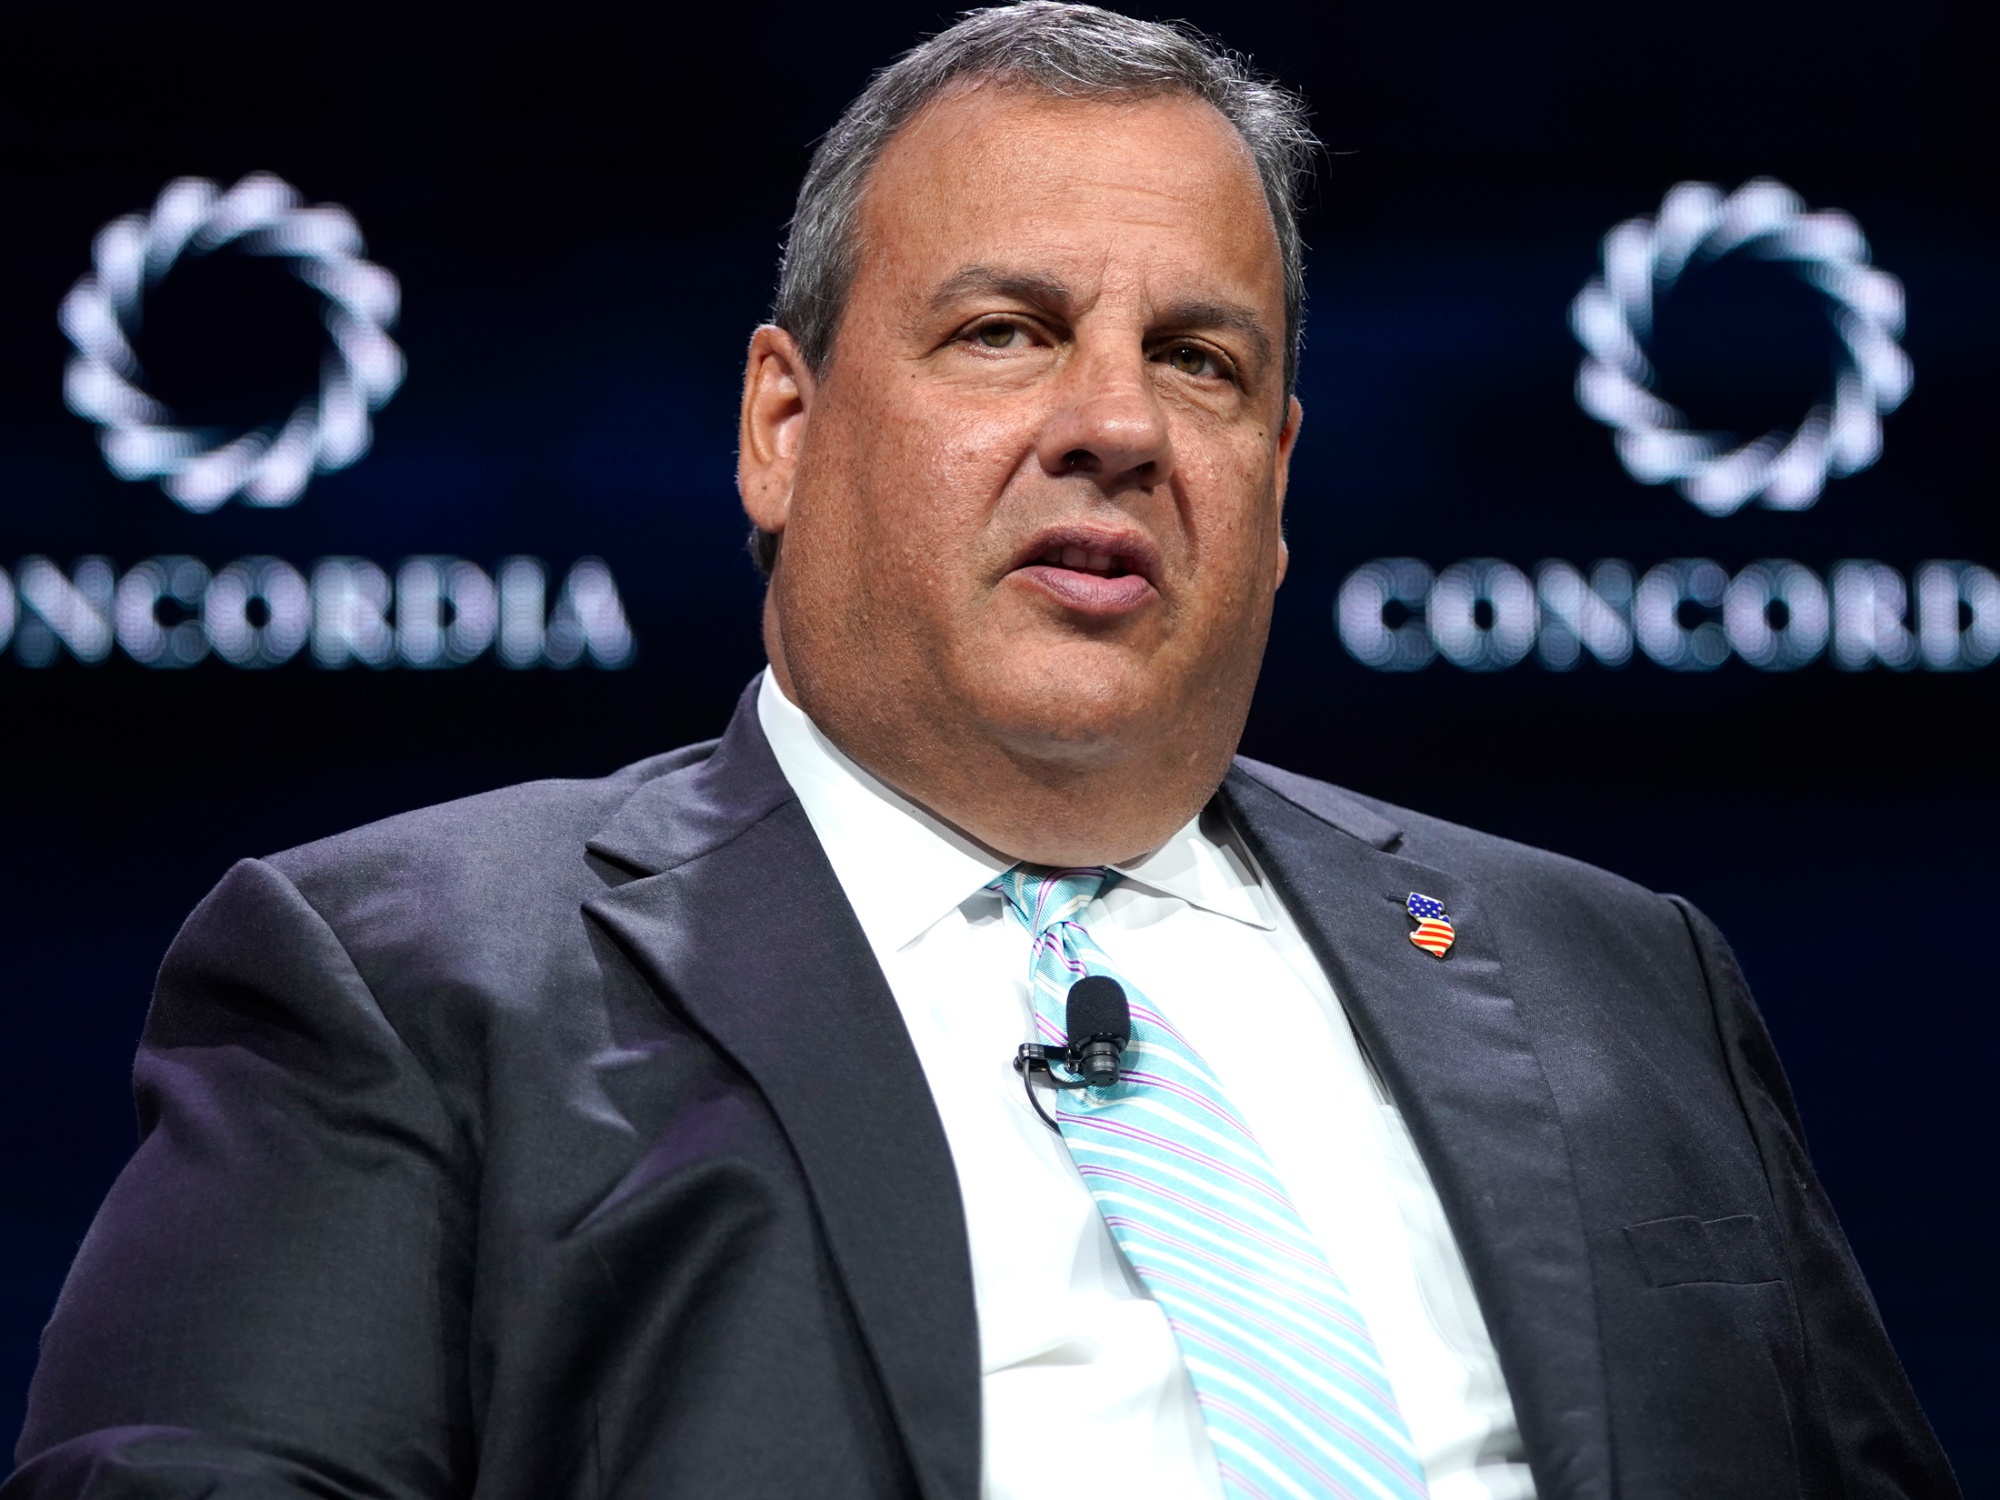 Chris Christie Among Lawyers Making $15 Million In 1Mdb Pact - Bloomberg